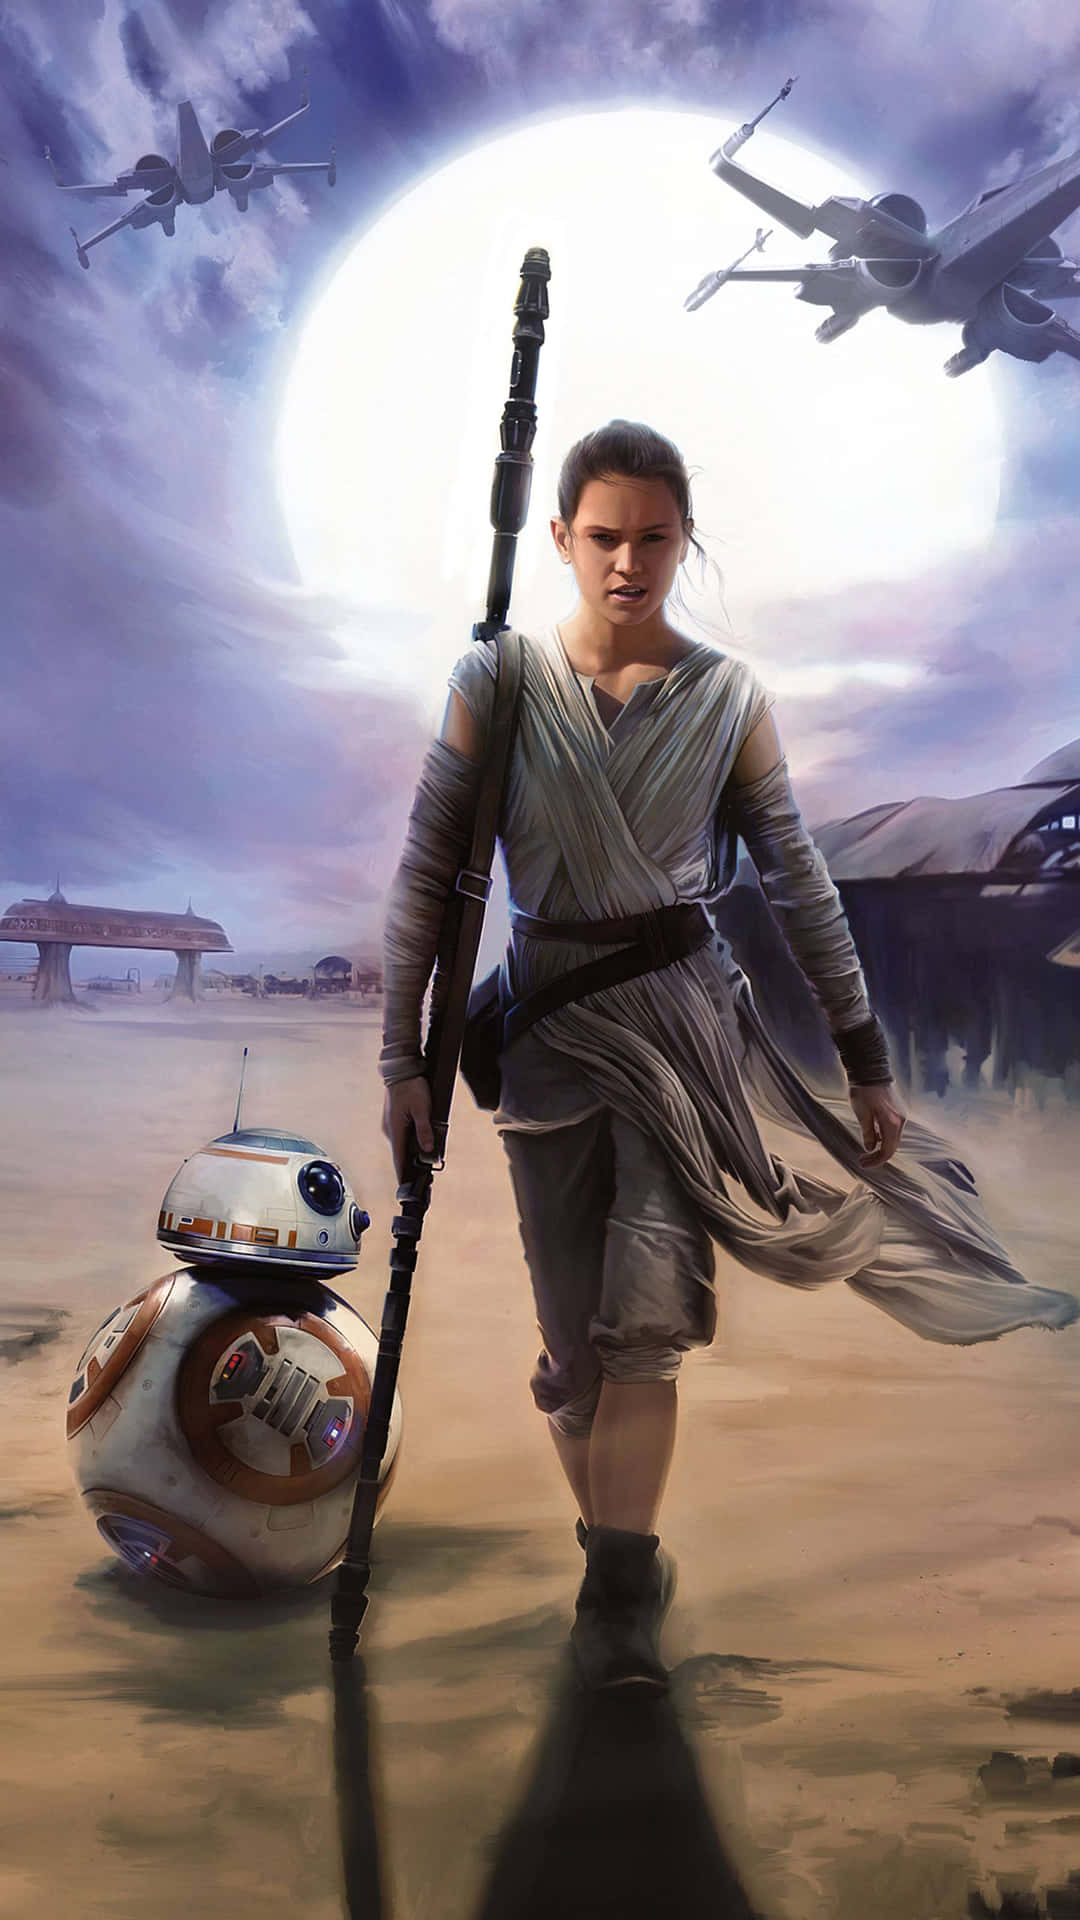 Rey, a powerful force-wielding warrior from the Star Wars franchise. Wallpaper